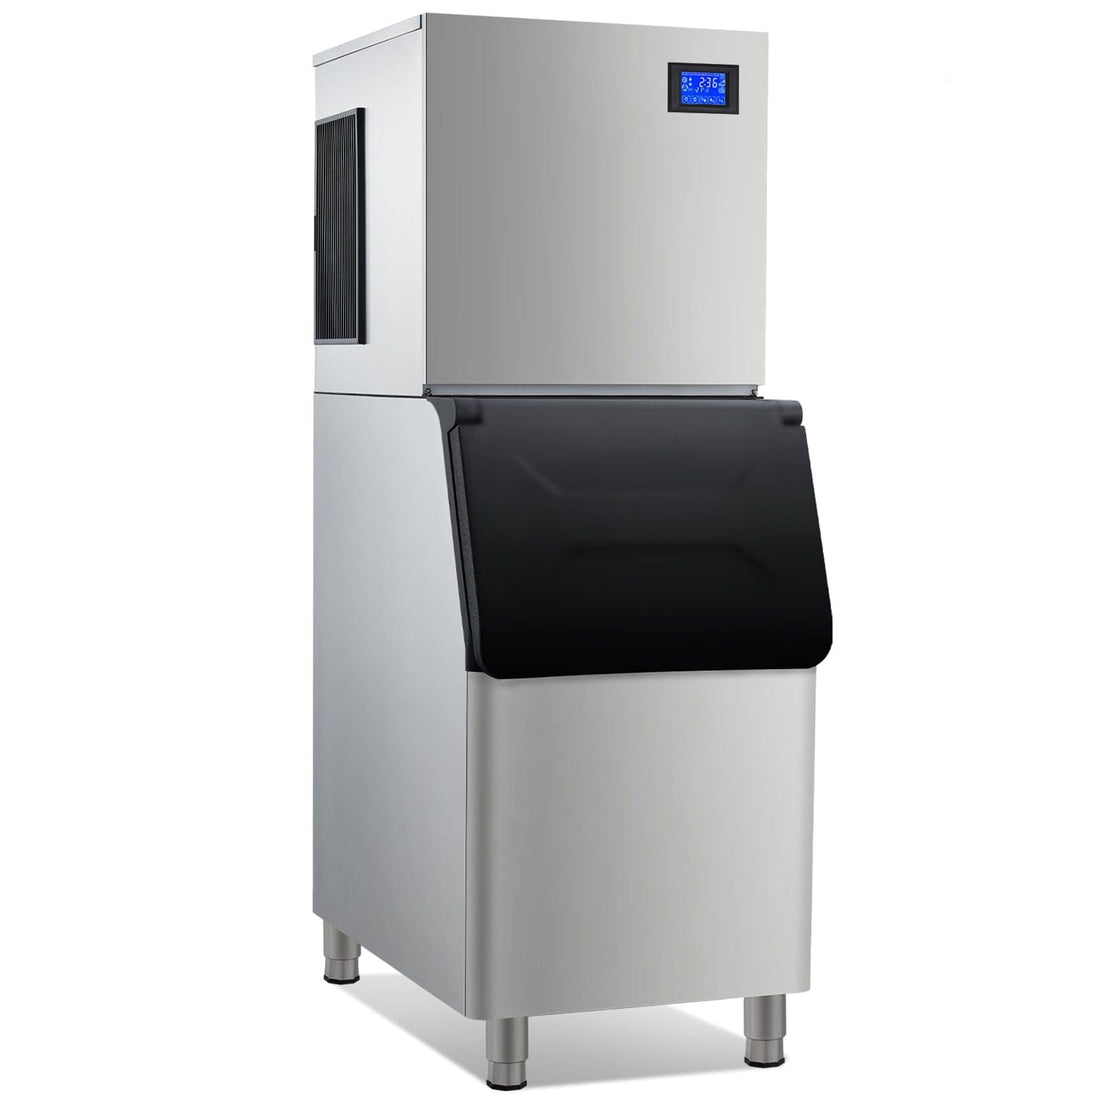 350LBS/24H Commercial Ice Maker + 310LBS Bin for Business